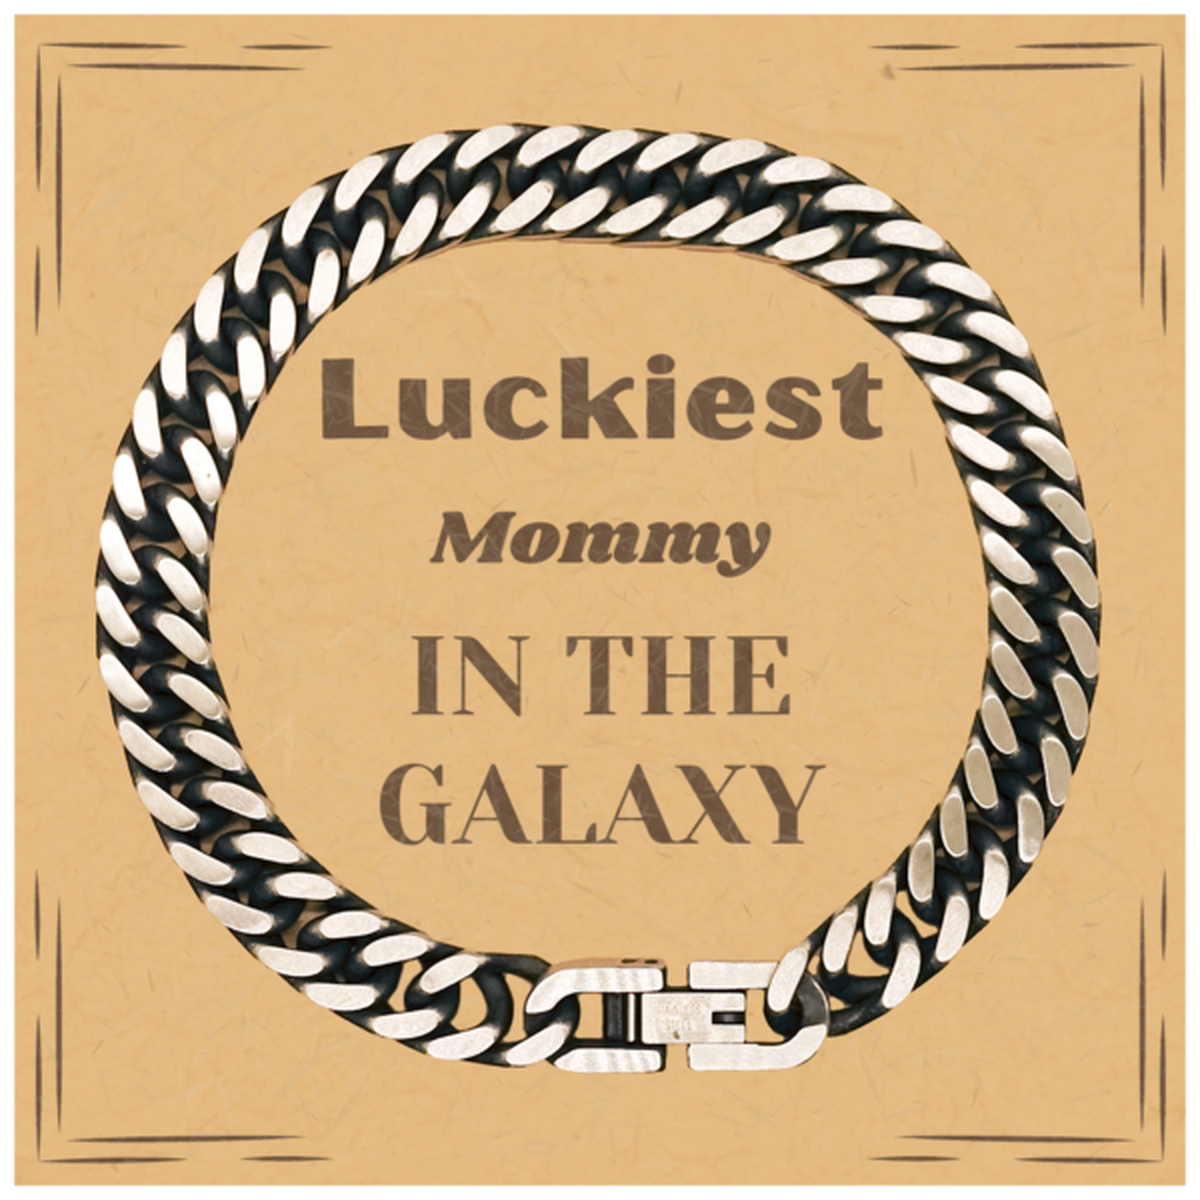 Luckiest Mommy in the Galaxy, To My Mommy Message Card Gifts, Christmas Mommy Cuban Link Chain Bracelet Gifts, X-mas Birthday Unique Gifts For Mommy Men Women